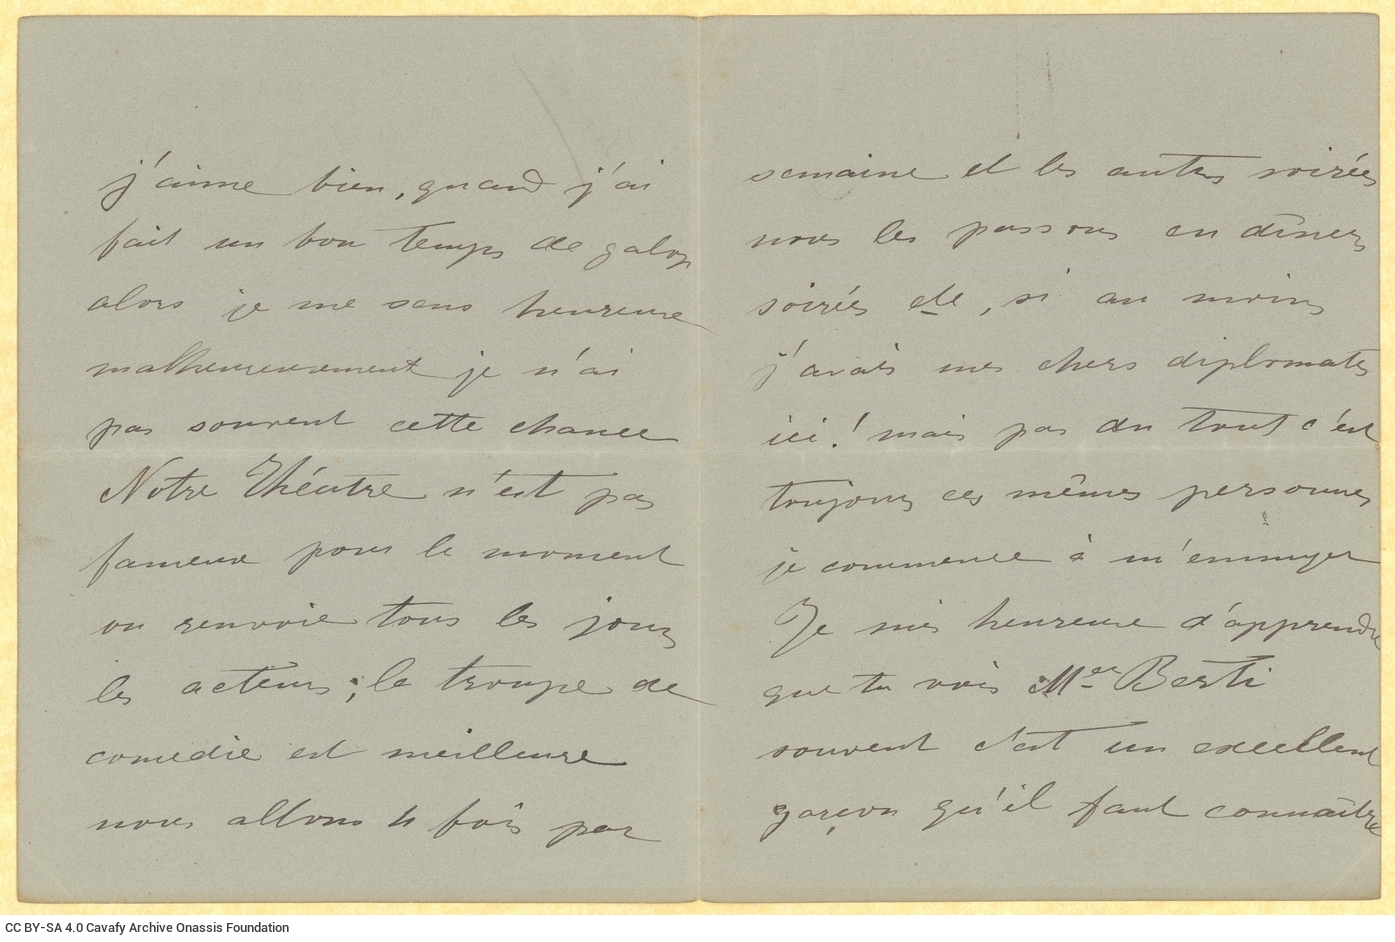 Handwritten letter by Sévastie Verhaeghe de Naeyer to her nephew, Paul Cavafy, in two bifolios. Her first name printed on th